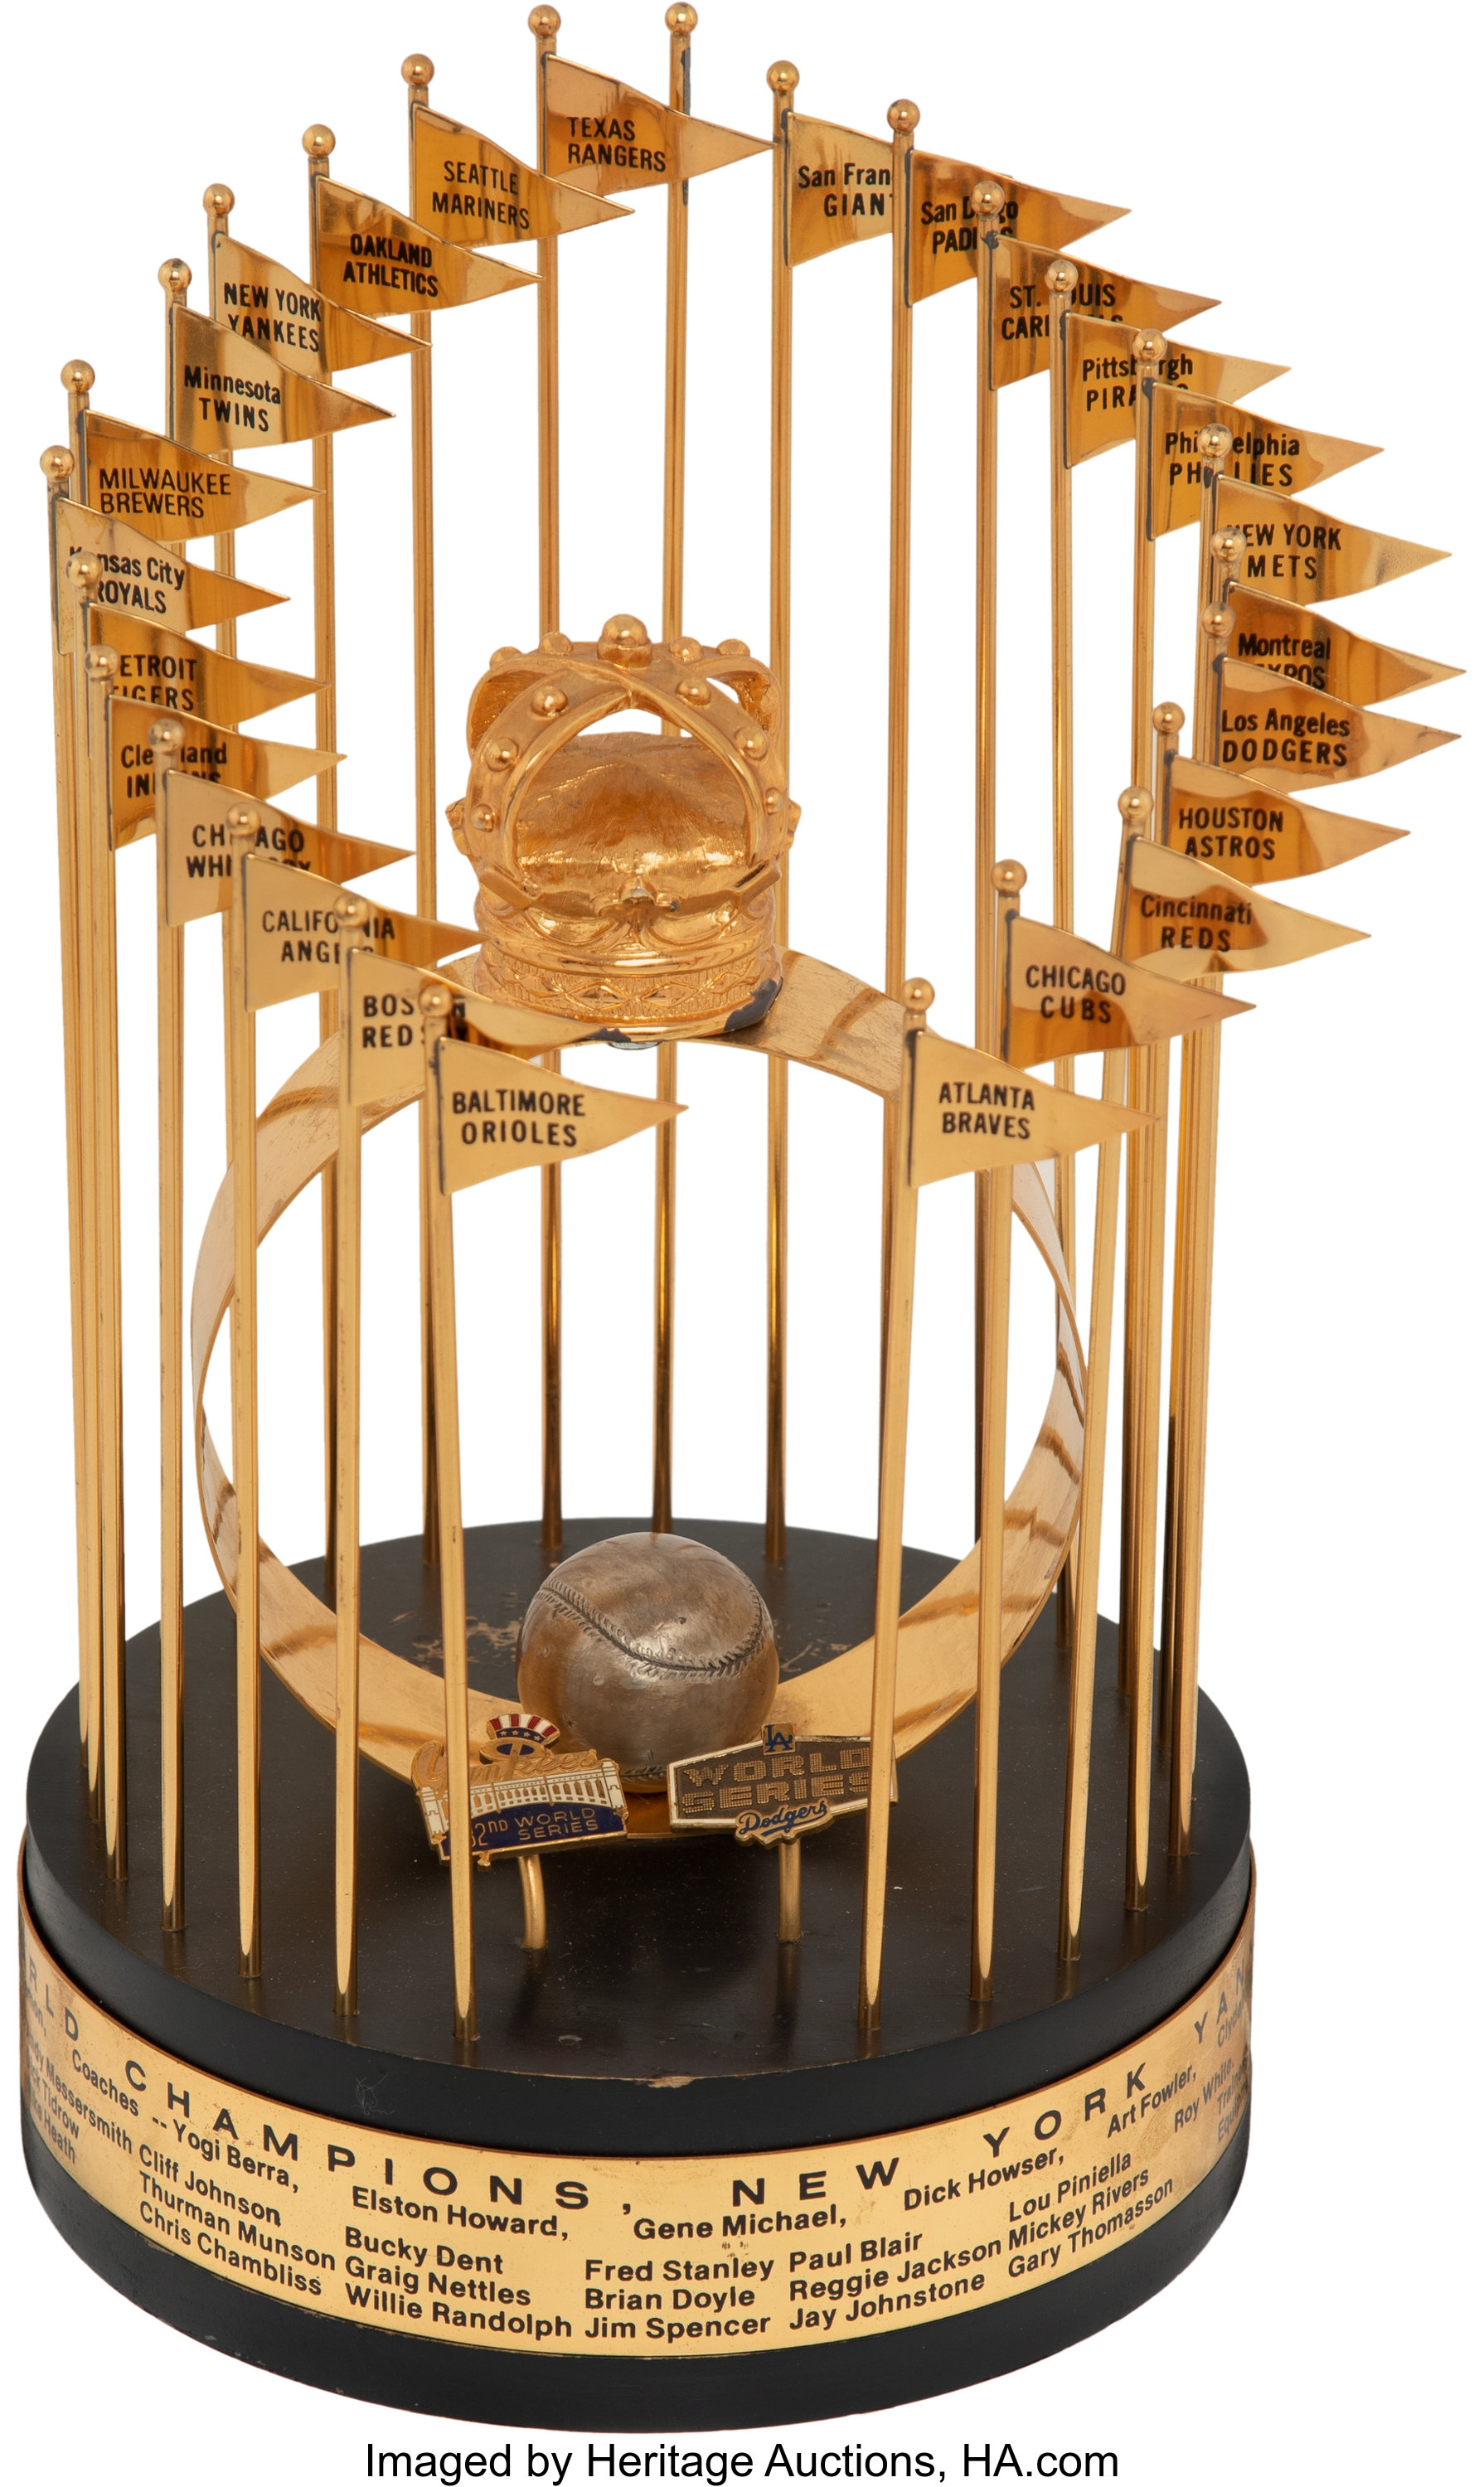 Yankees' World Series Trophy Visits Rose Hill